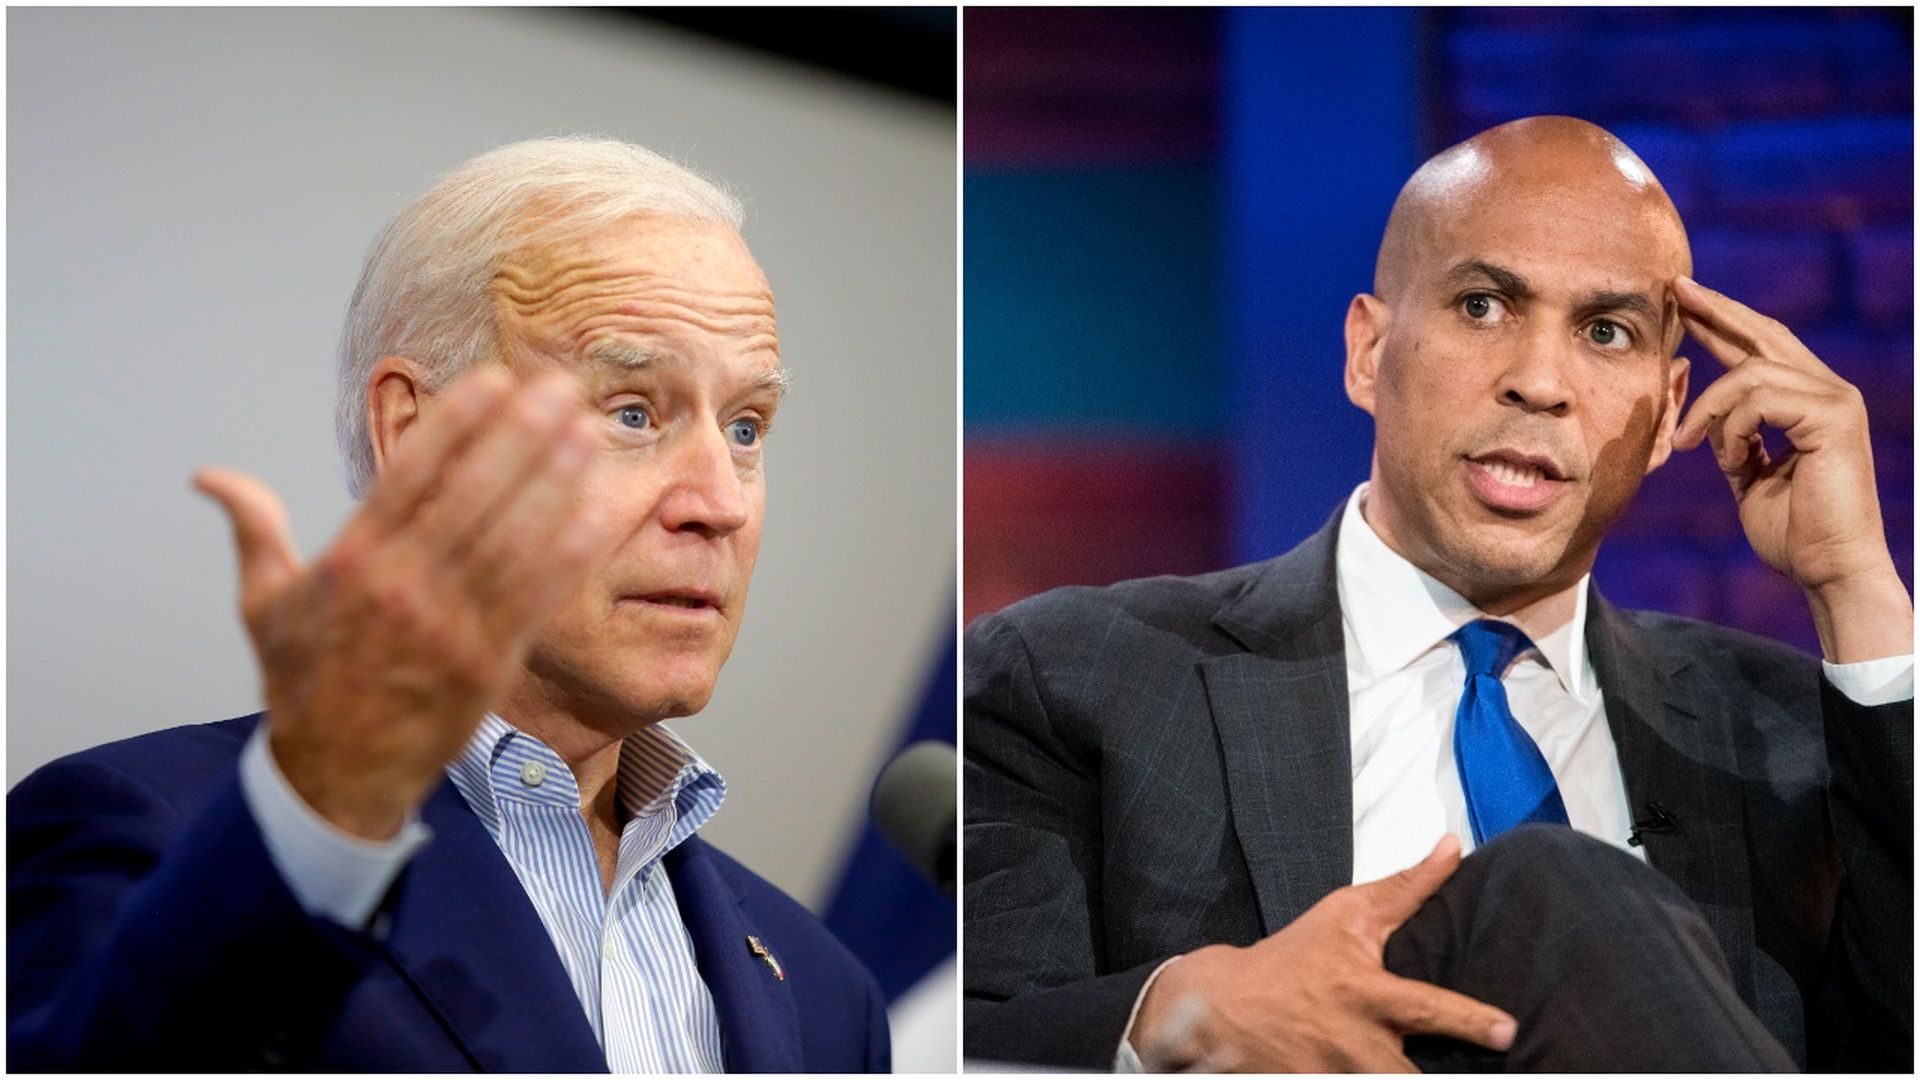 This image is a split screen of Joe Biden and Cory Booker.